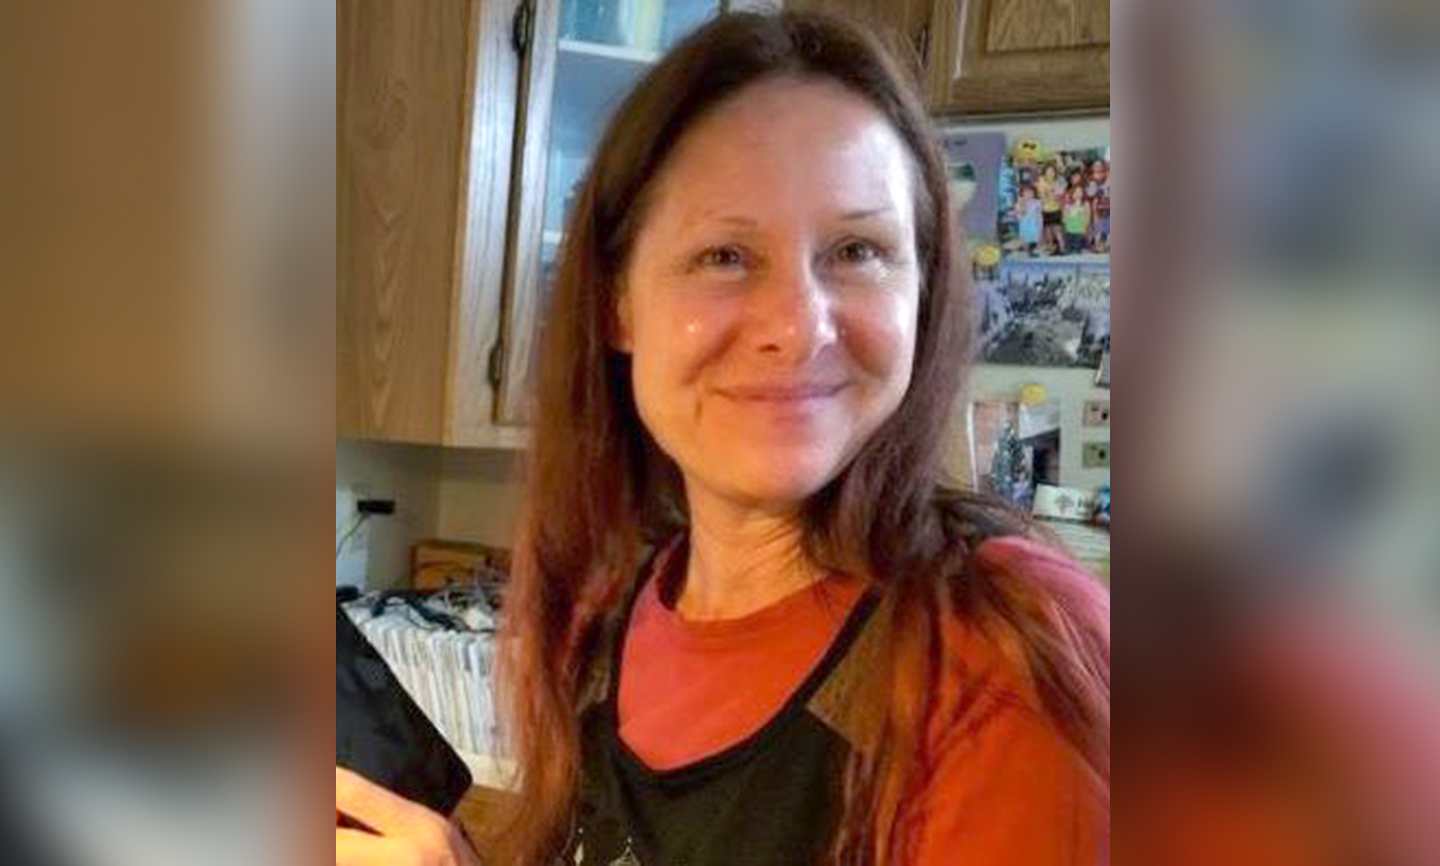 PHOTO: Search and rescue crews are looking for a Gresham woman, Diana Bober, 55, in the Mount Hood area in Clackamas County Oregon after authorities said they found her car near the Zigzag Ranger Station.